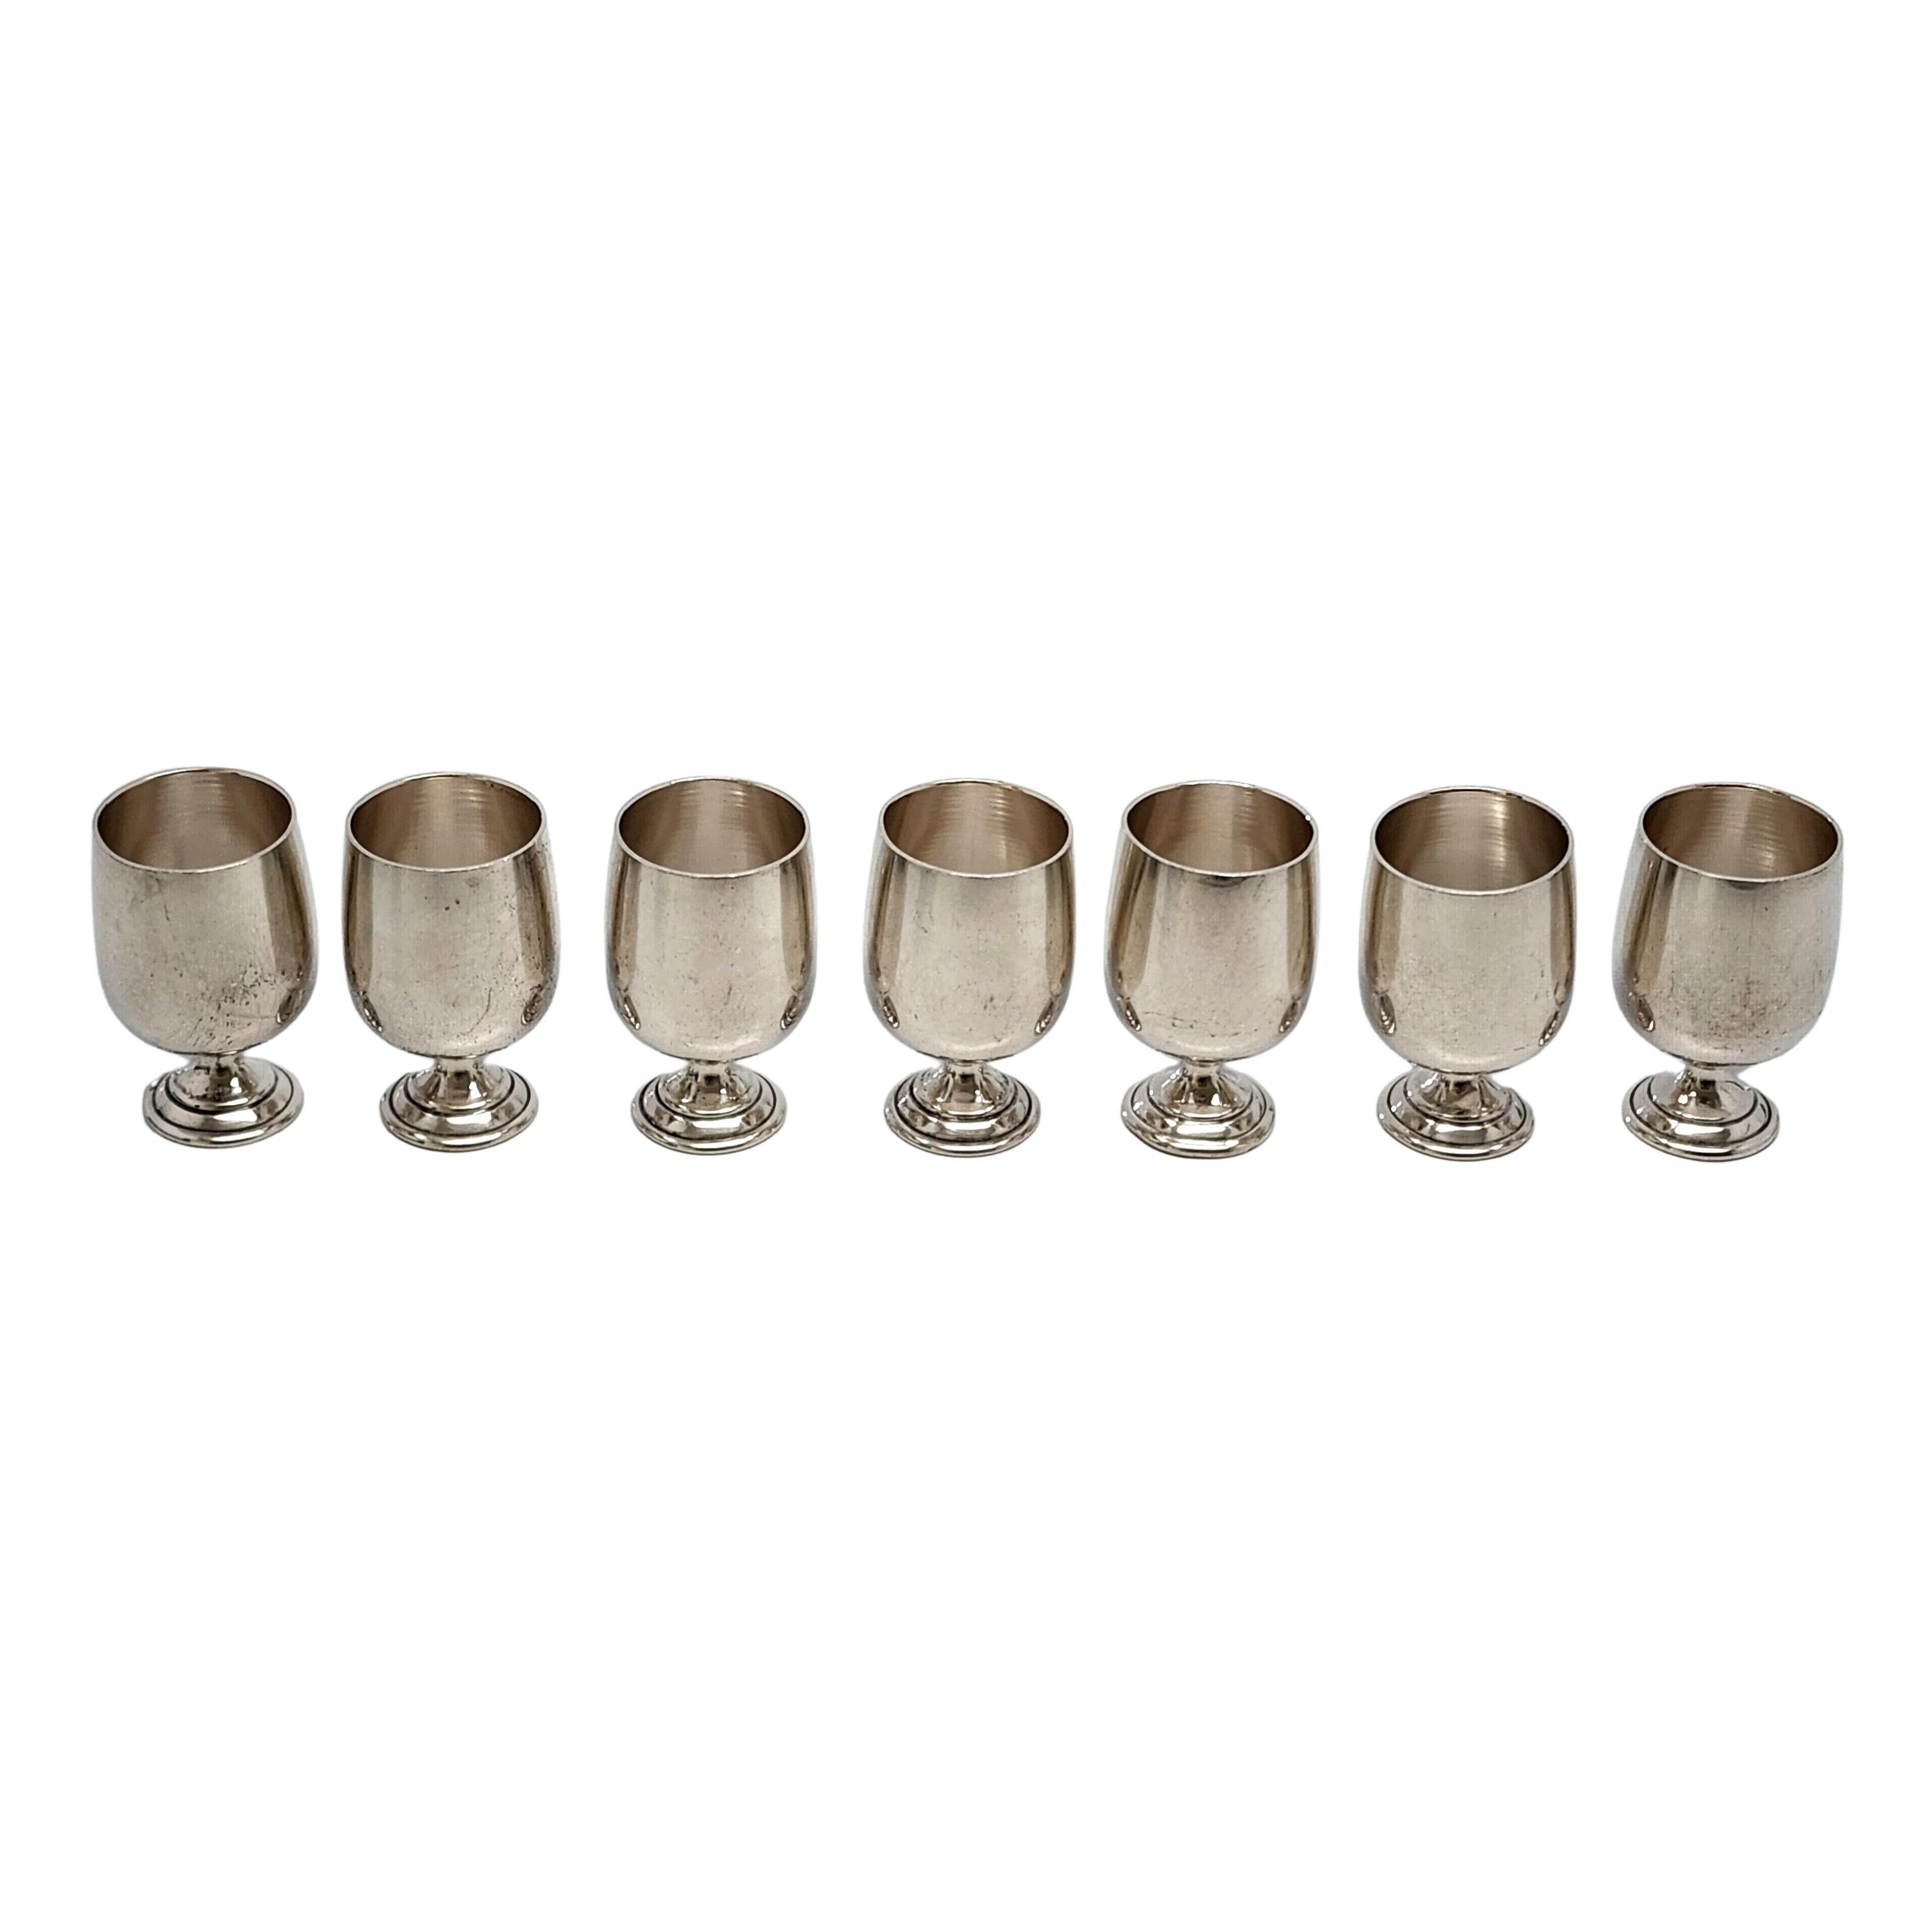 Set of 7 sterling silver cordial/shot cups by Baldwin & Miller.

Simple and timeless goblet design.

Measures approx 2